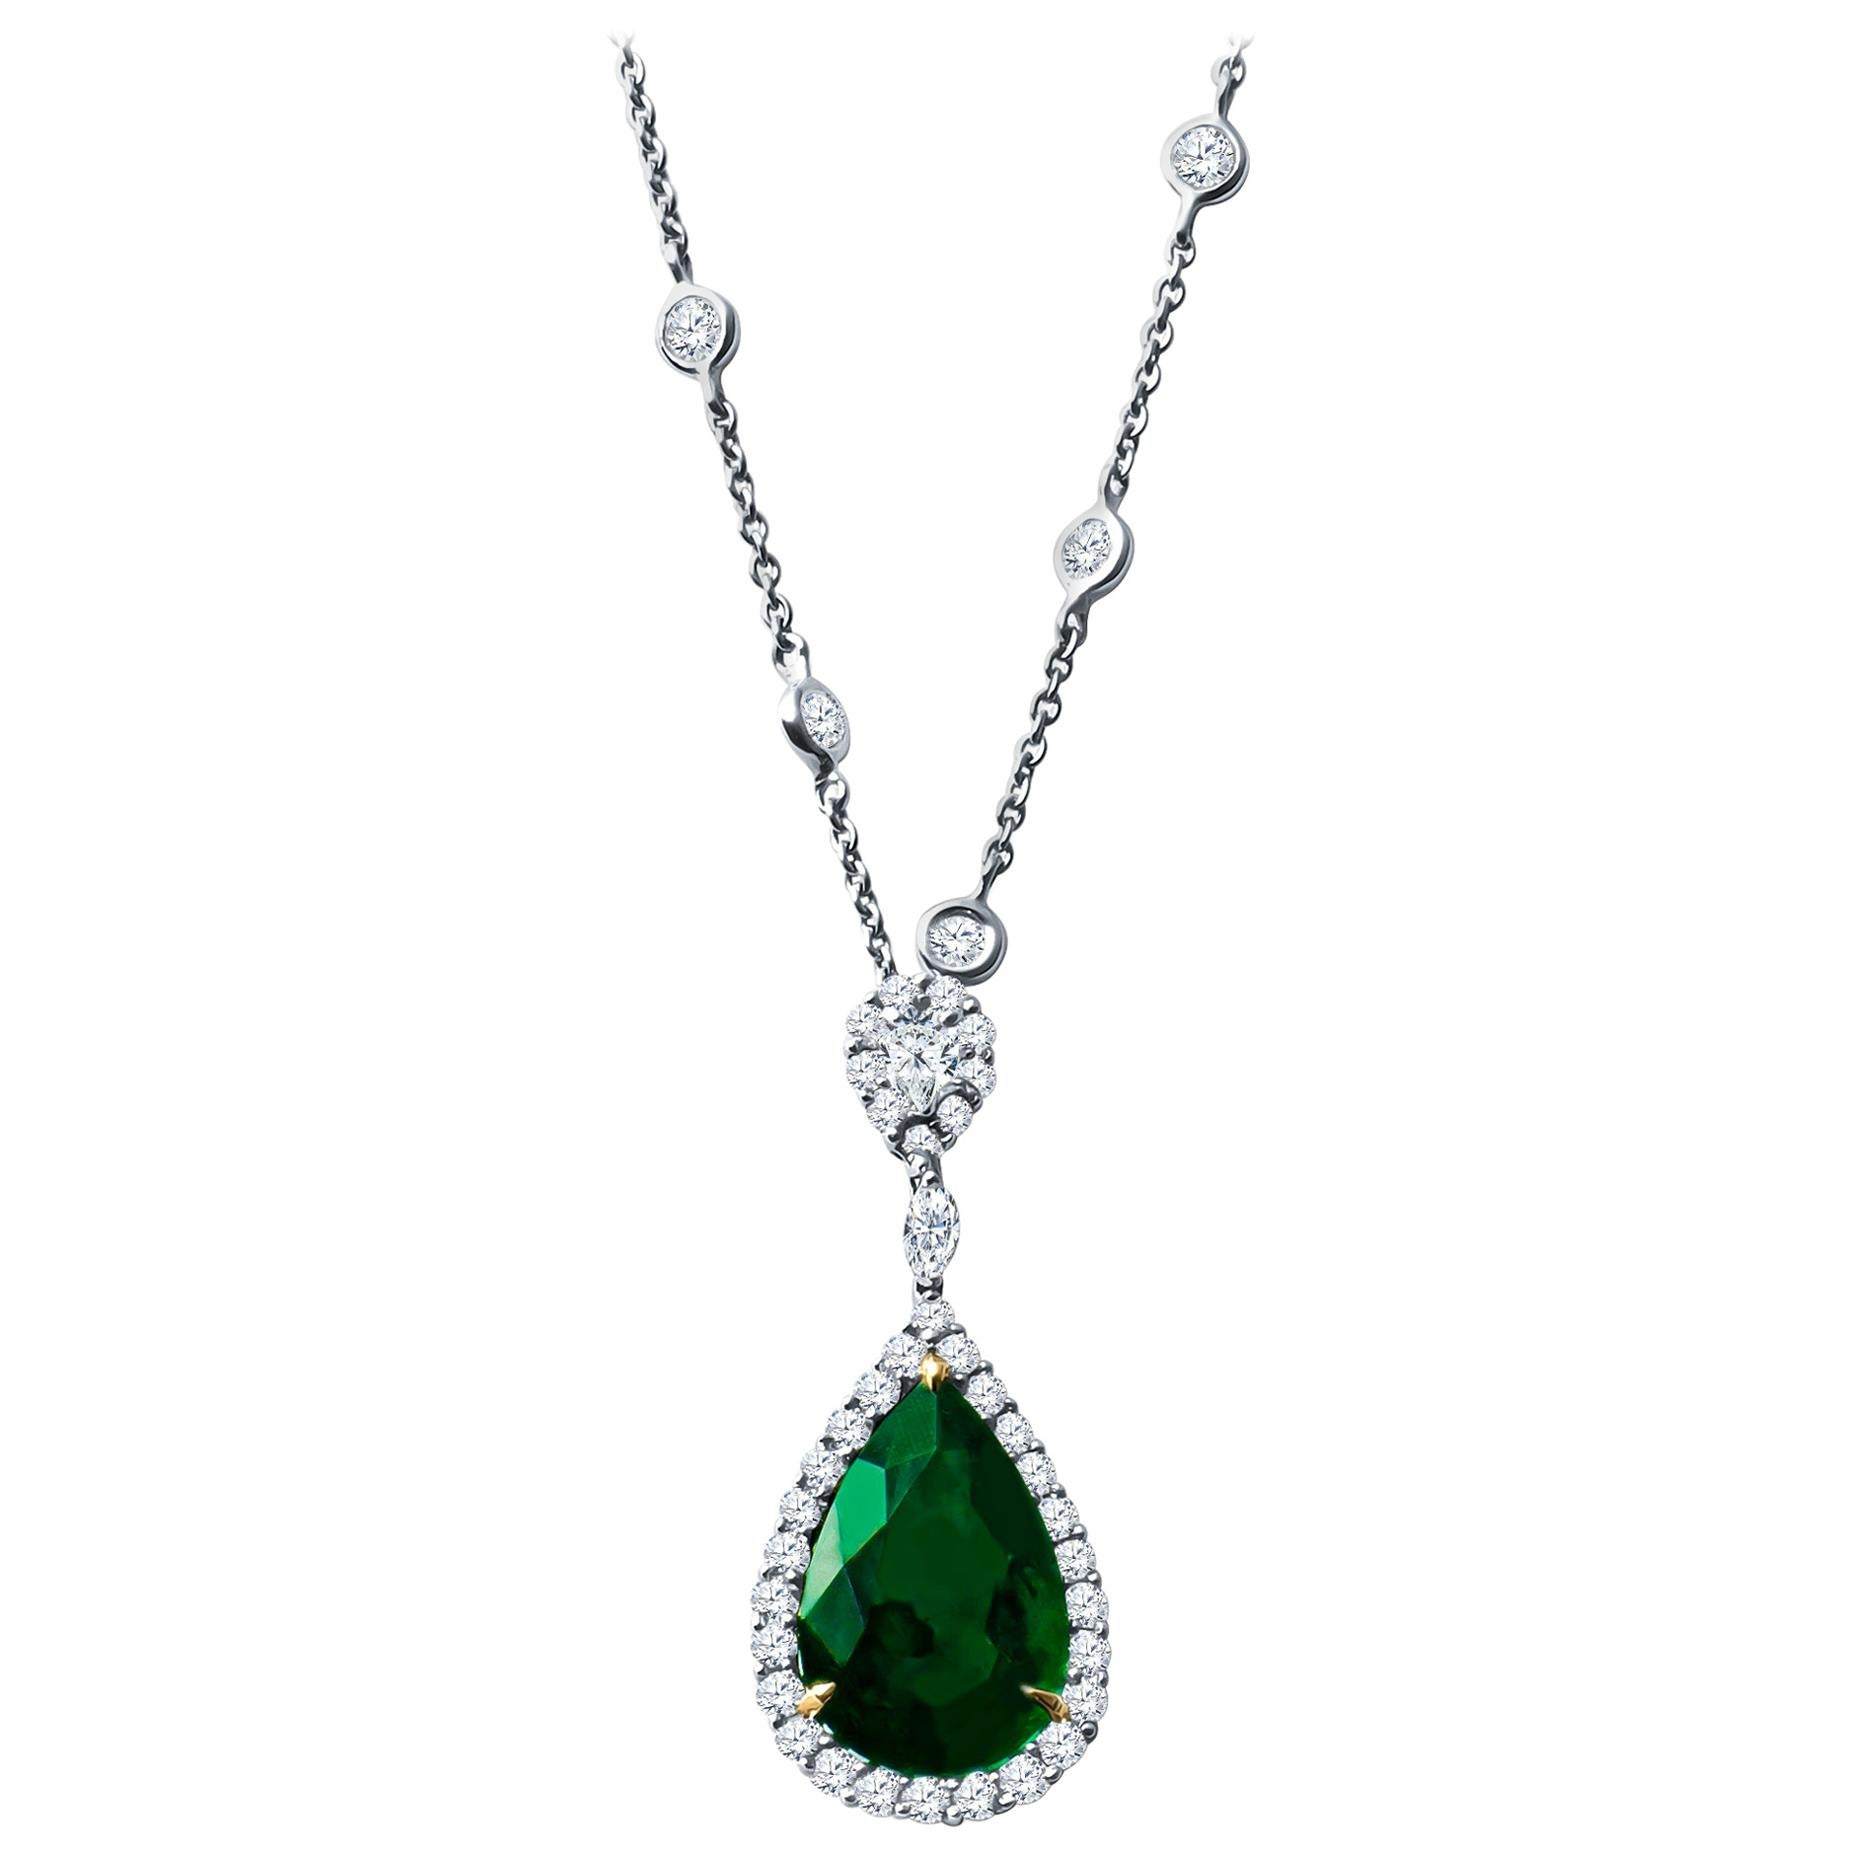 6.75 Carat Pear Shape Emerald and 3.82 Carat Round Diamond by the Yard Necklace For Sale